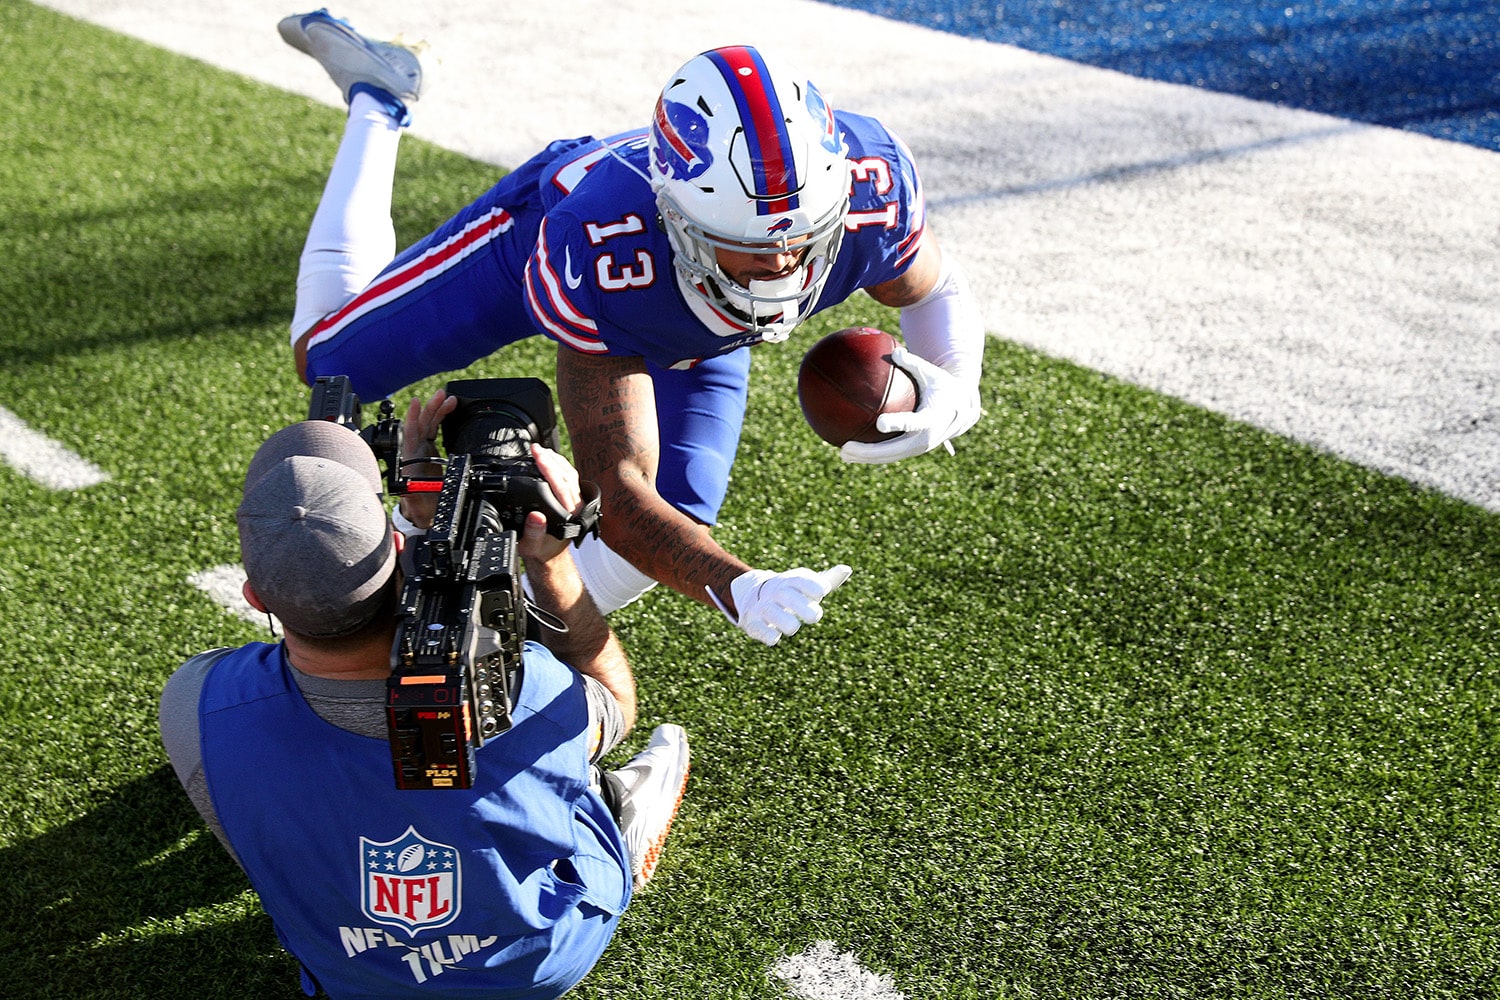 Bills receiver Gabe Davis completes diving catch in front of NFL camera man before game